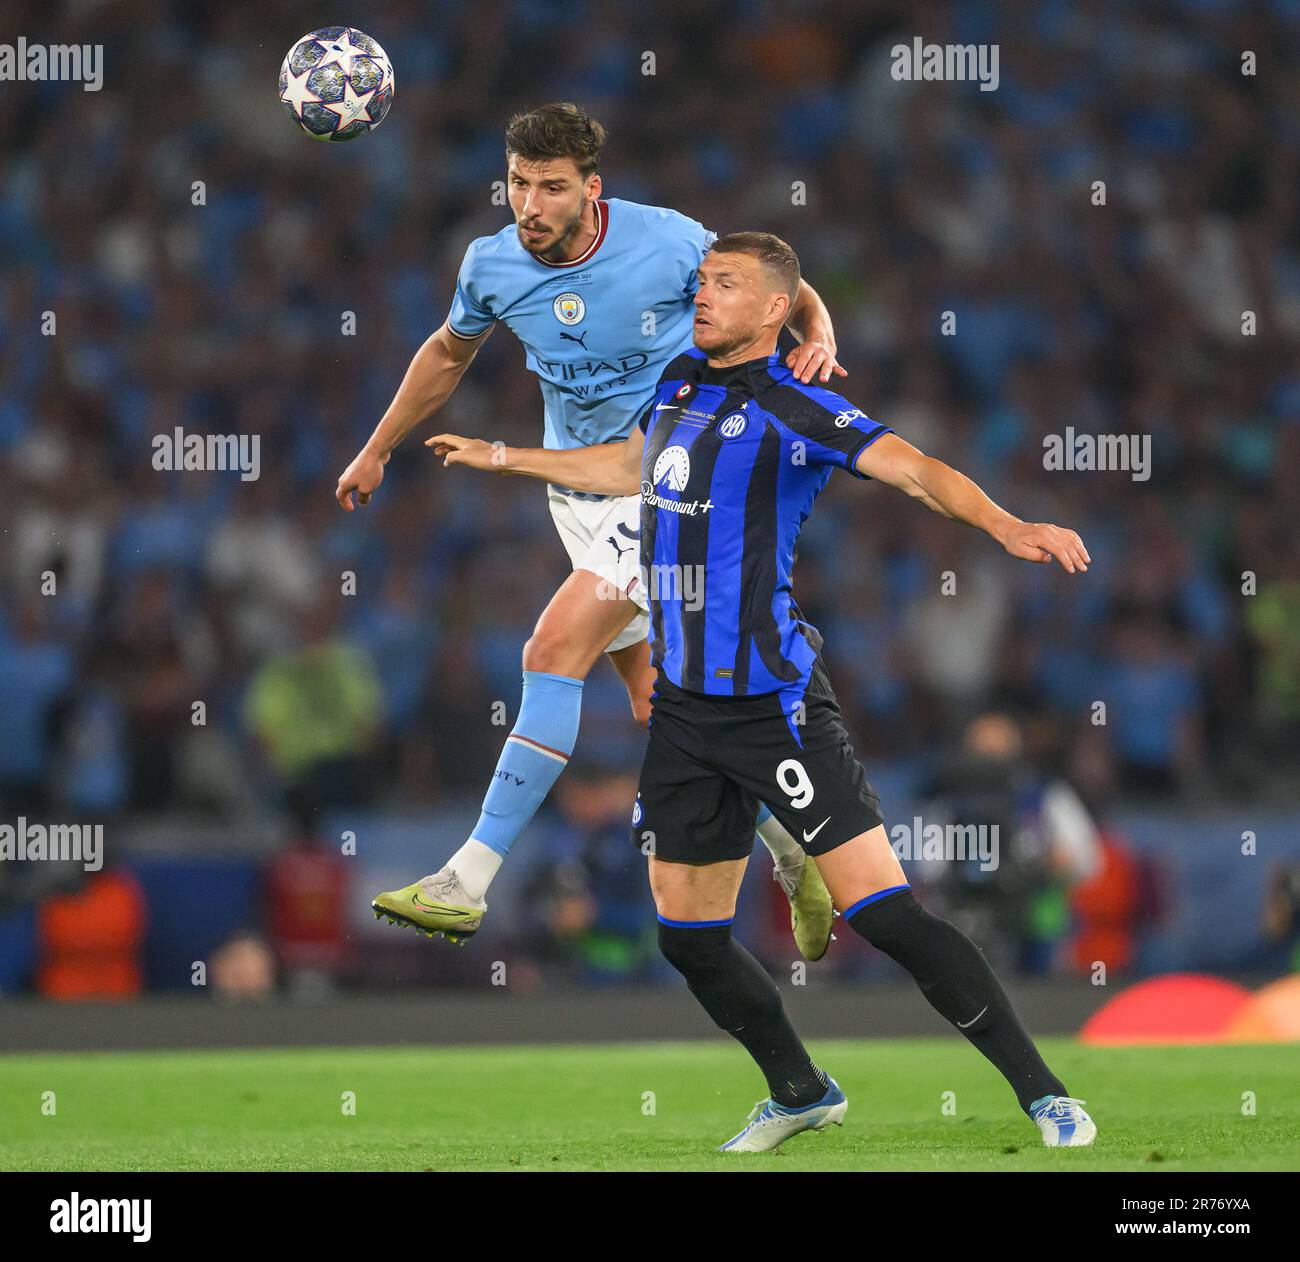 Istanbul, Turkey. 10th June, 2023. 10 Jun 2023 - Manchester City v Inter Milan - UEFA Champions League - Final - Ataturk Olympic Stadium Manchester City's Ruben Dias and Edin Dzeko during the Champions League Final in Istanbul. Picture Credit: Mark Pain/Alamy Live News Stock Photo